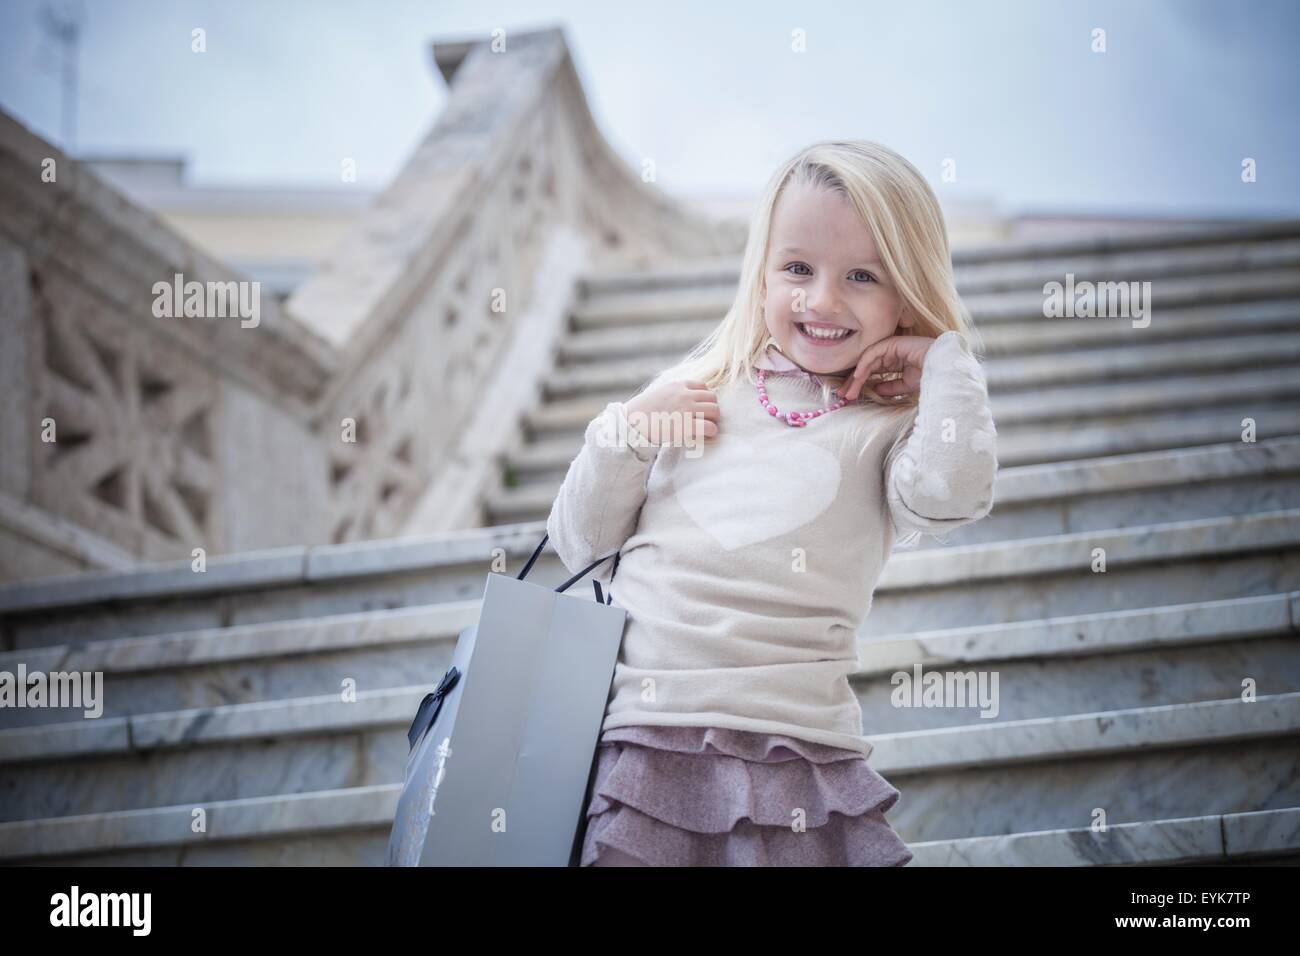 Portrait of young girl on stairway carrying shopping bag, Cagliari, Sardinia, Italy Stock Photo